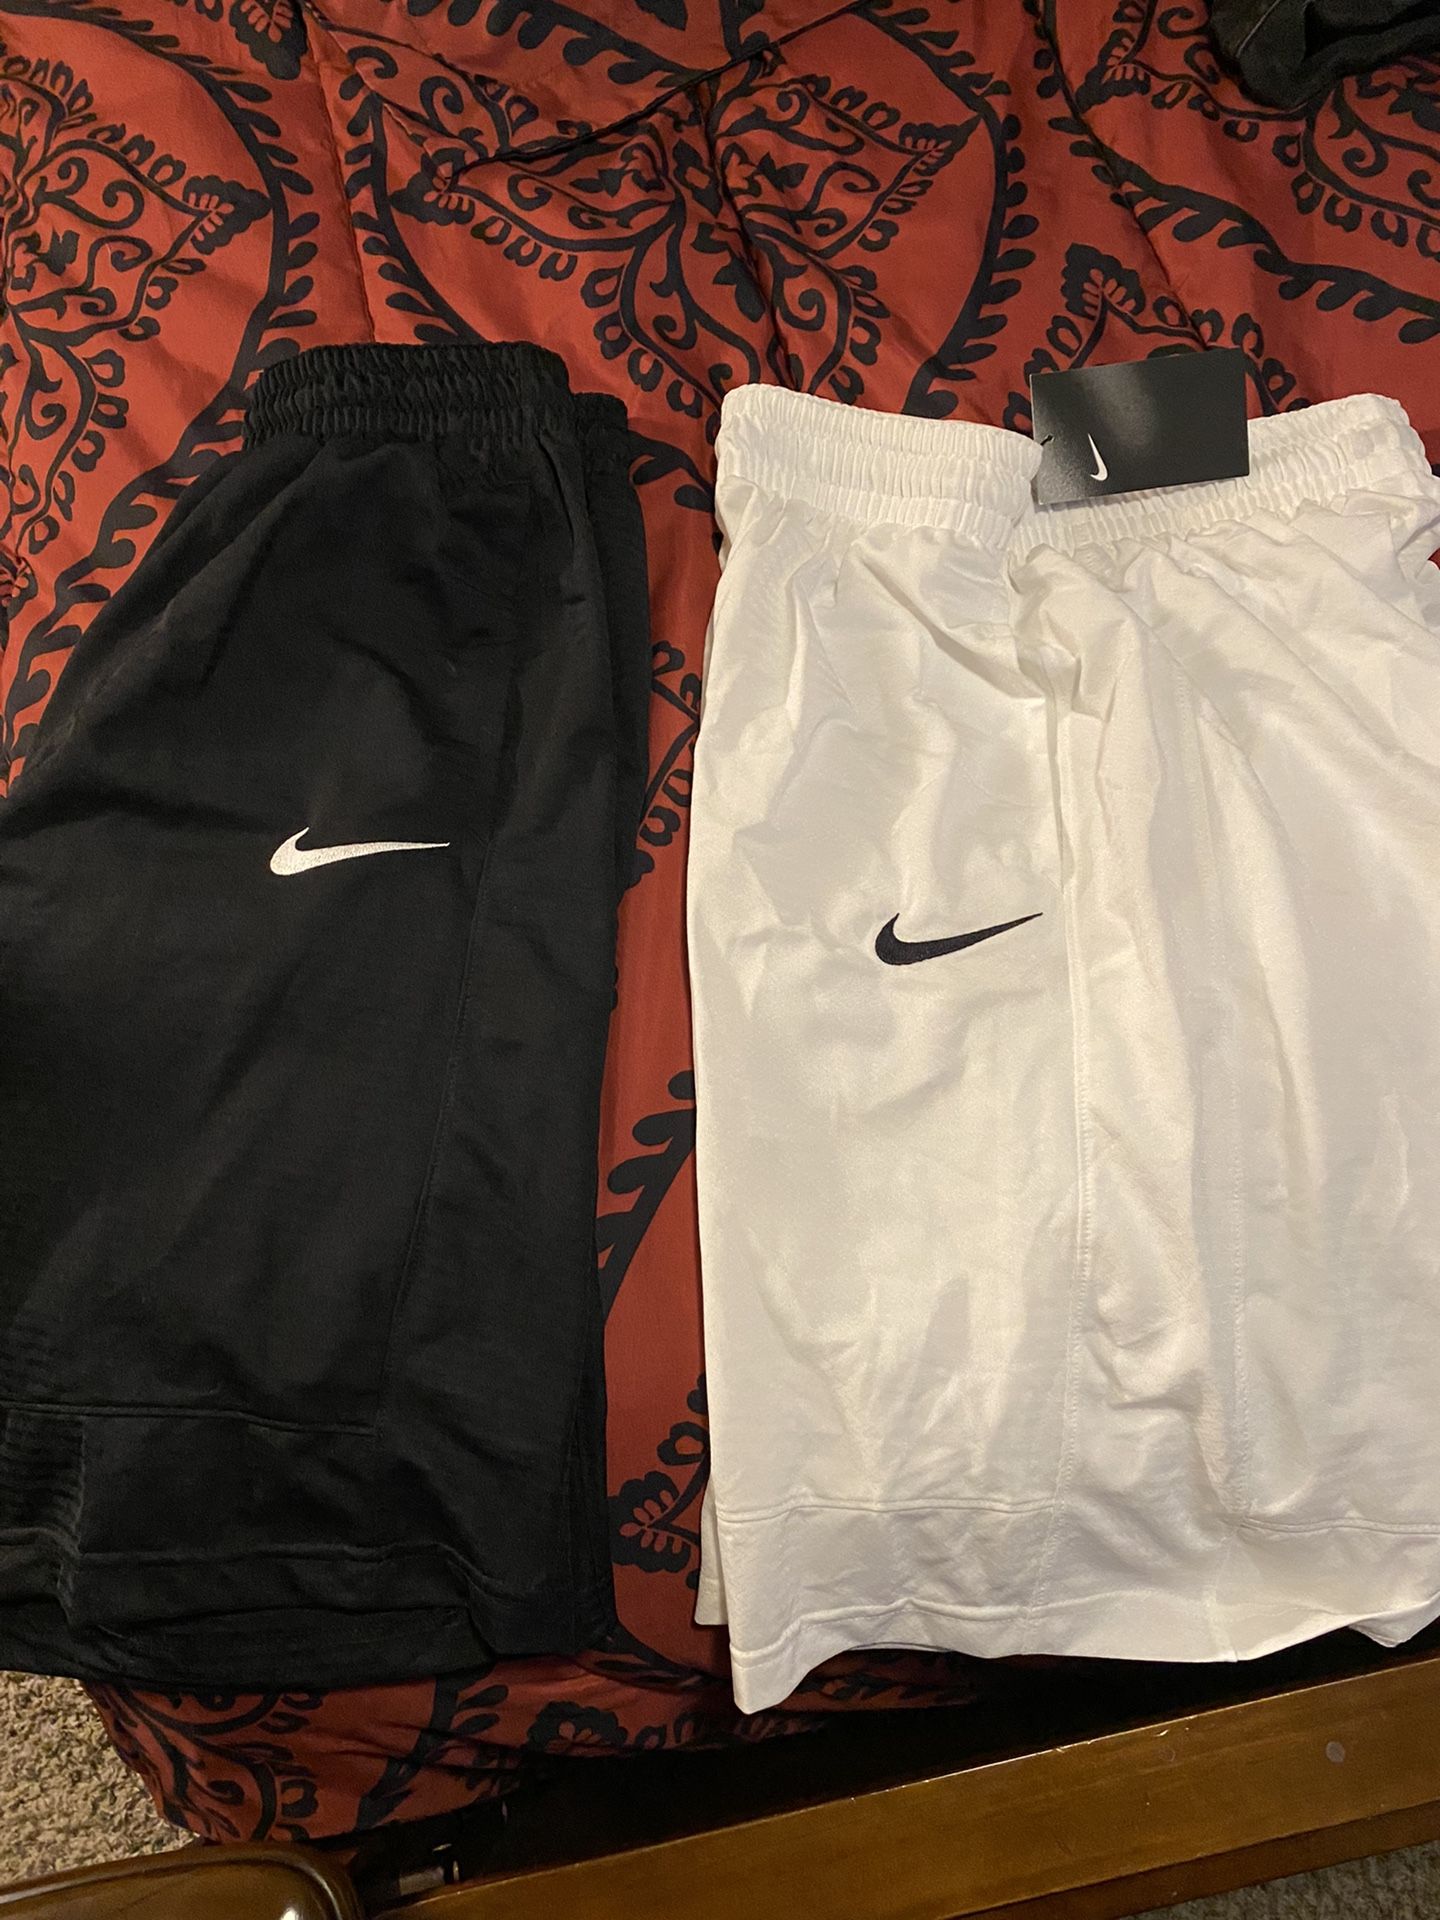 Nike Shorts 1 For $20 Or 2 For $35